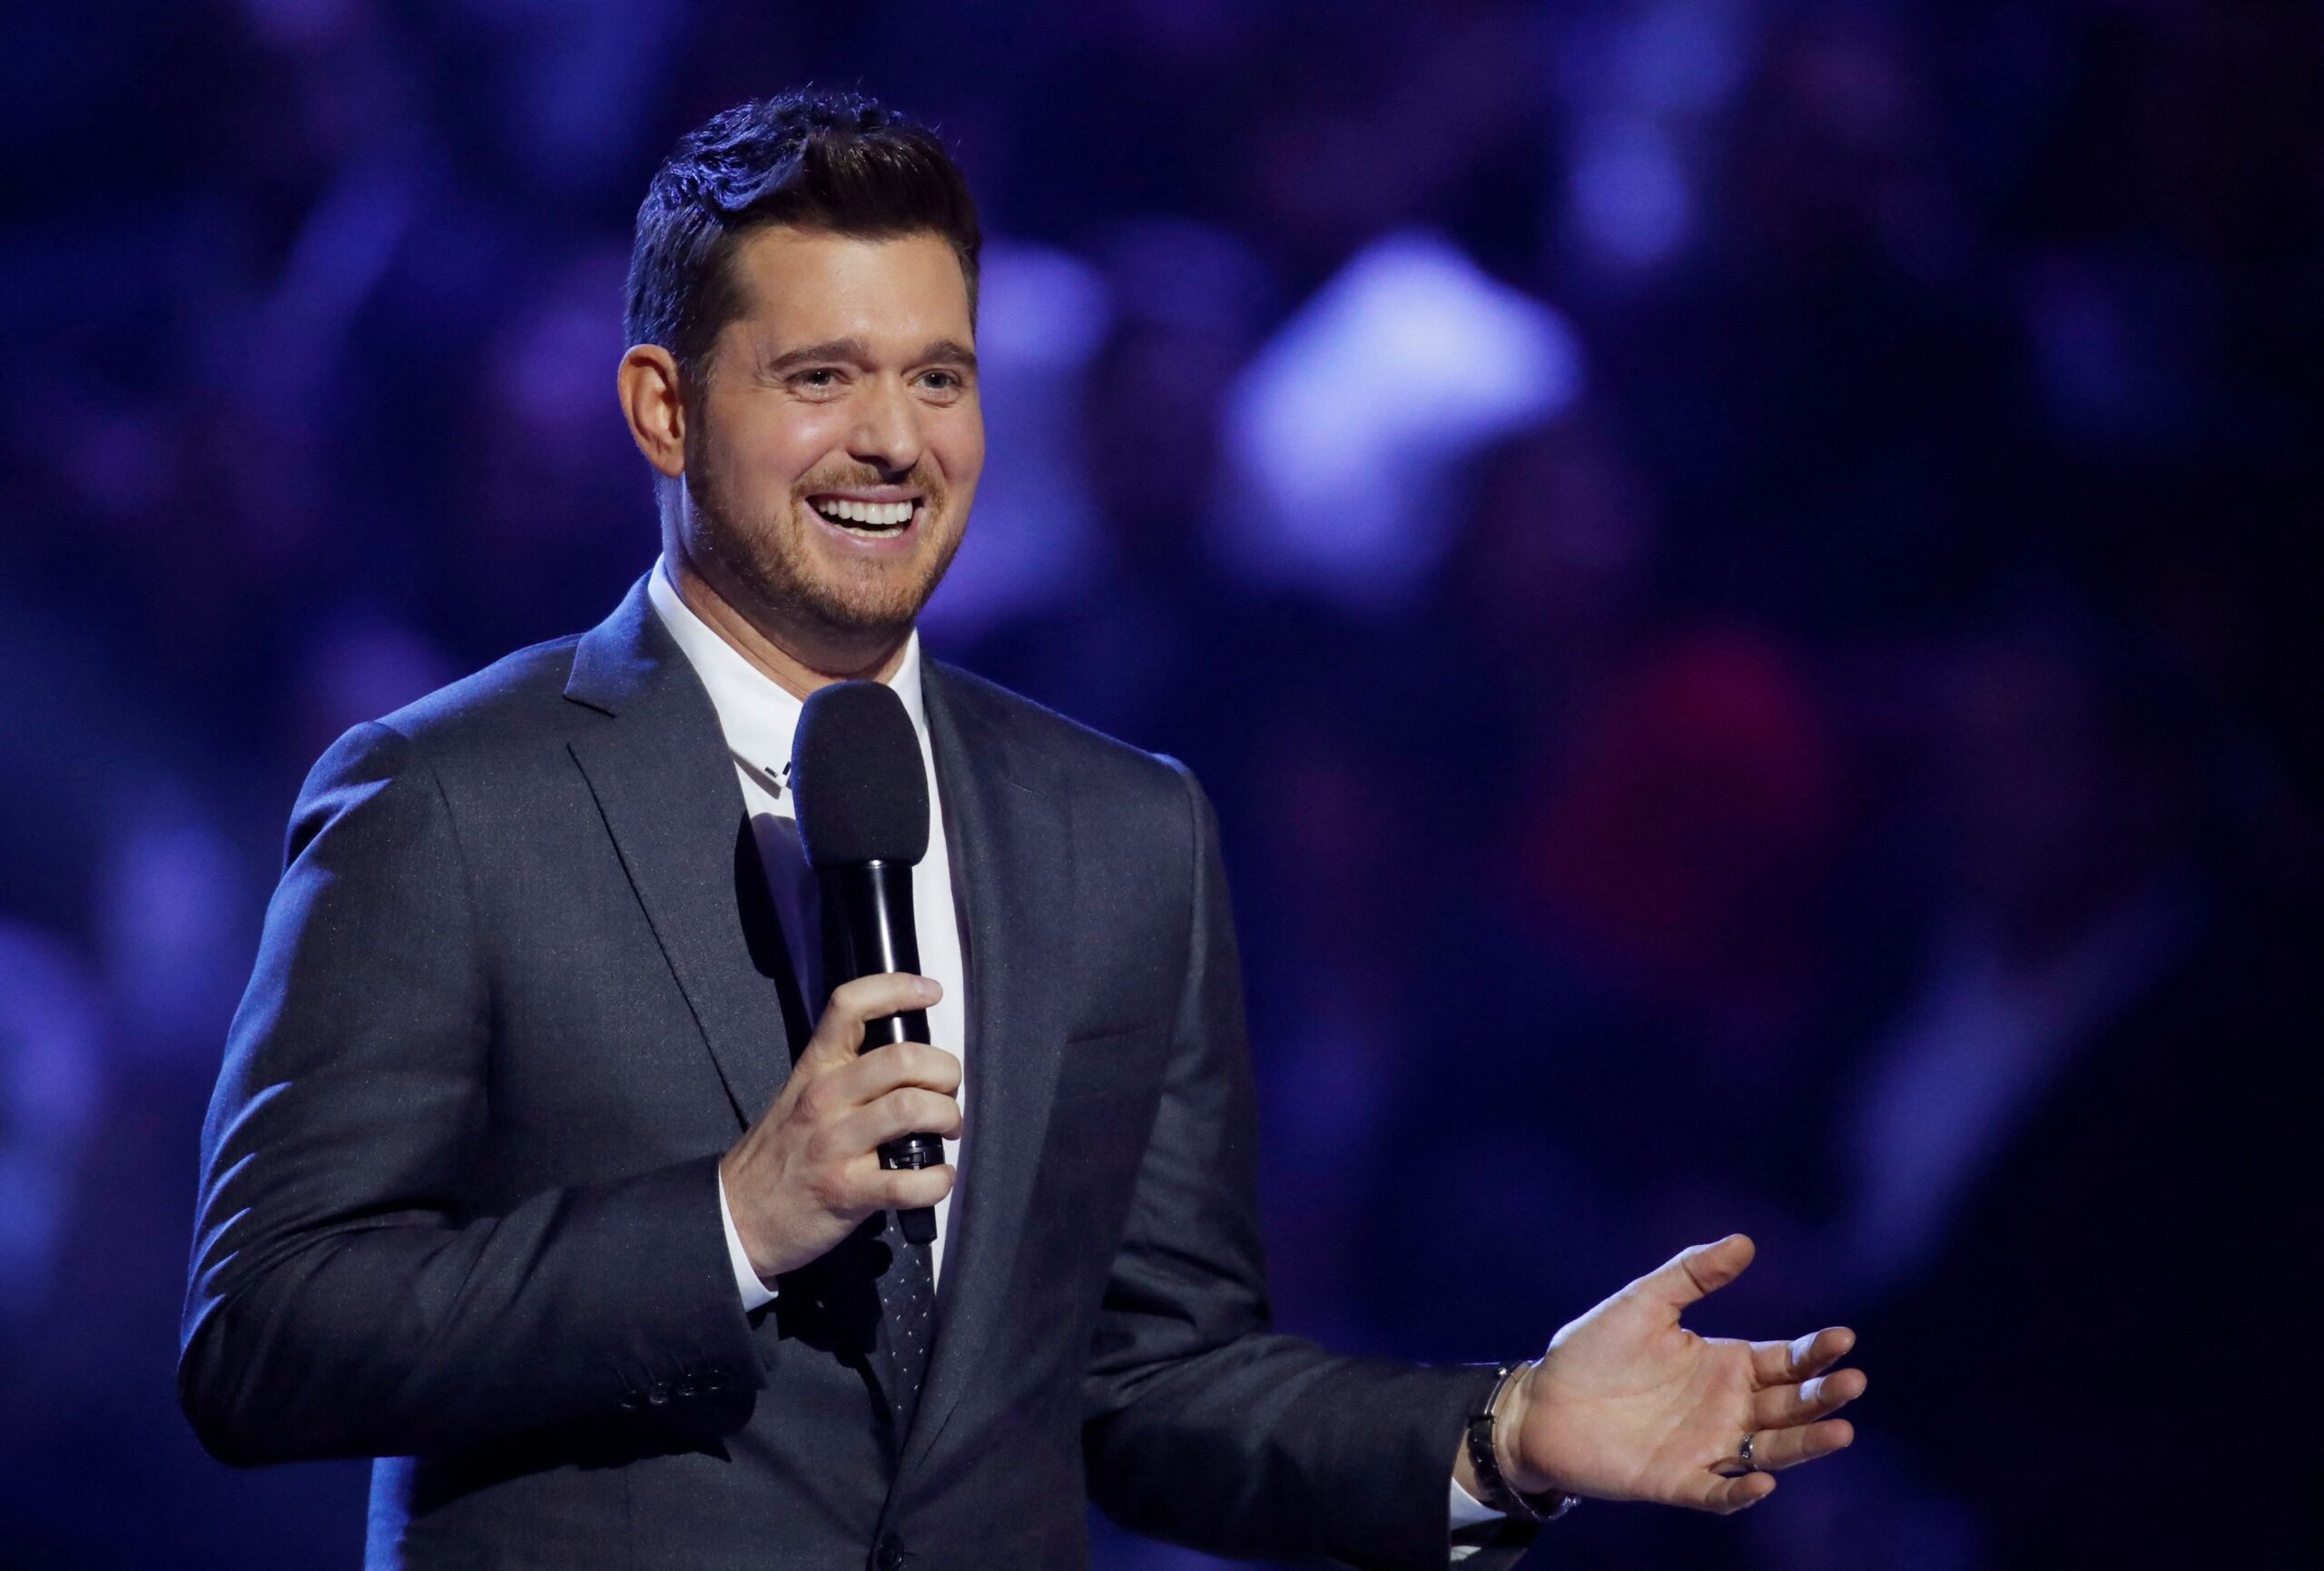 Michael Buble finds a ‘Higher’ calling on latest album